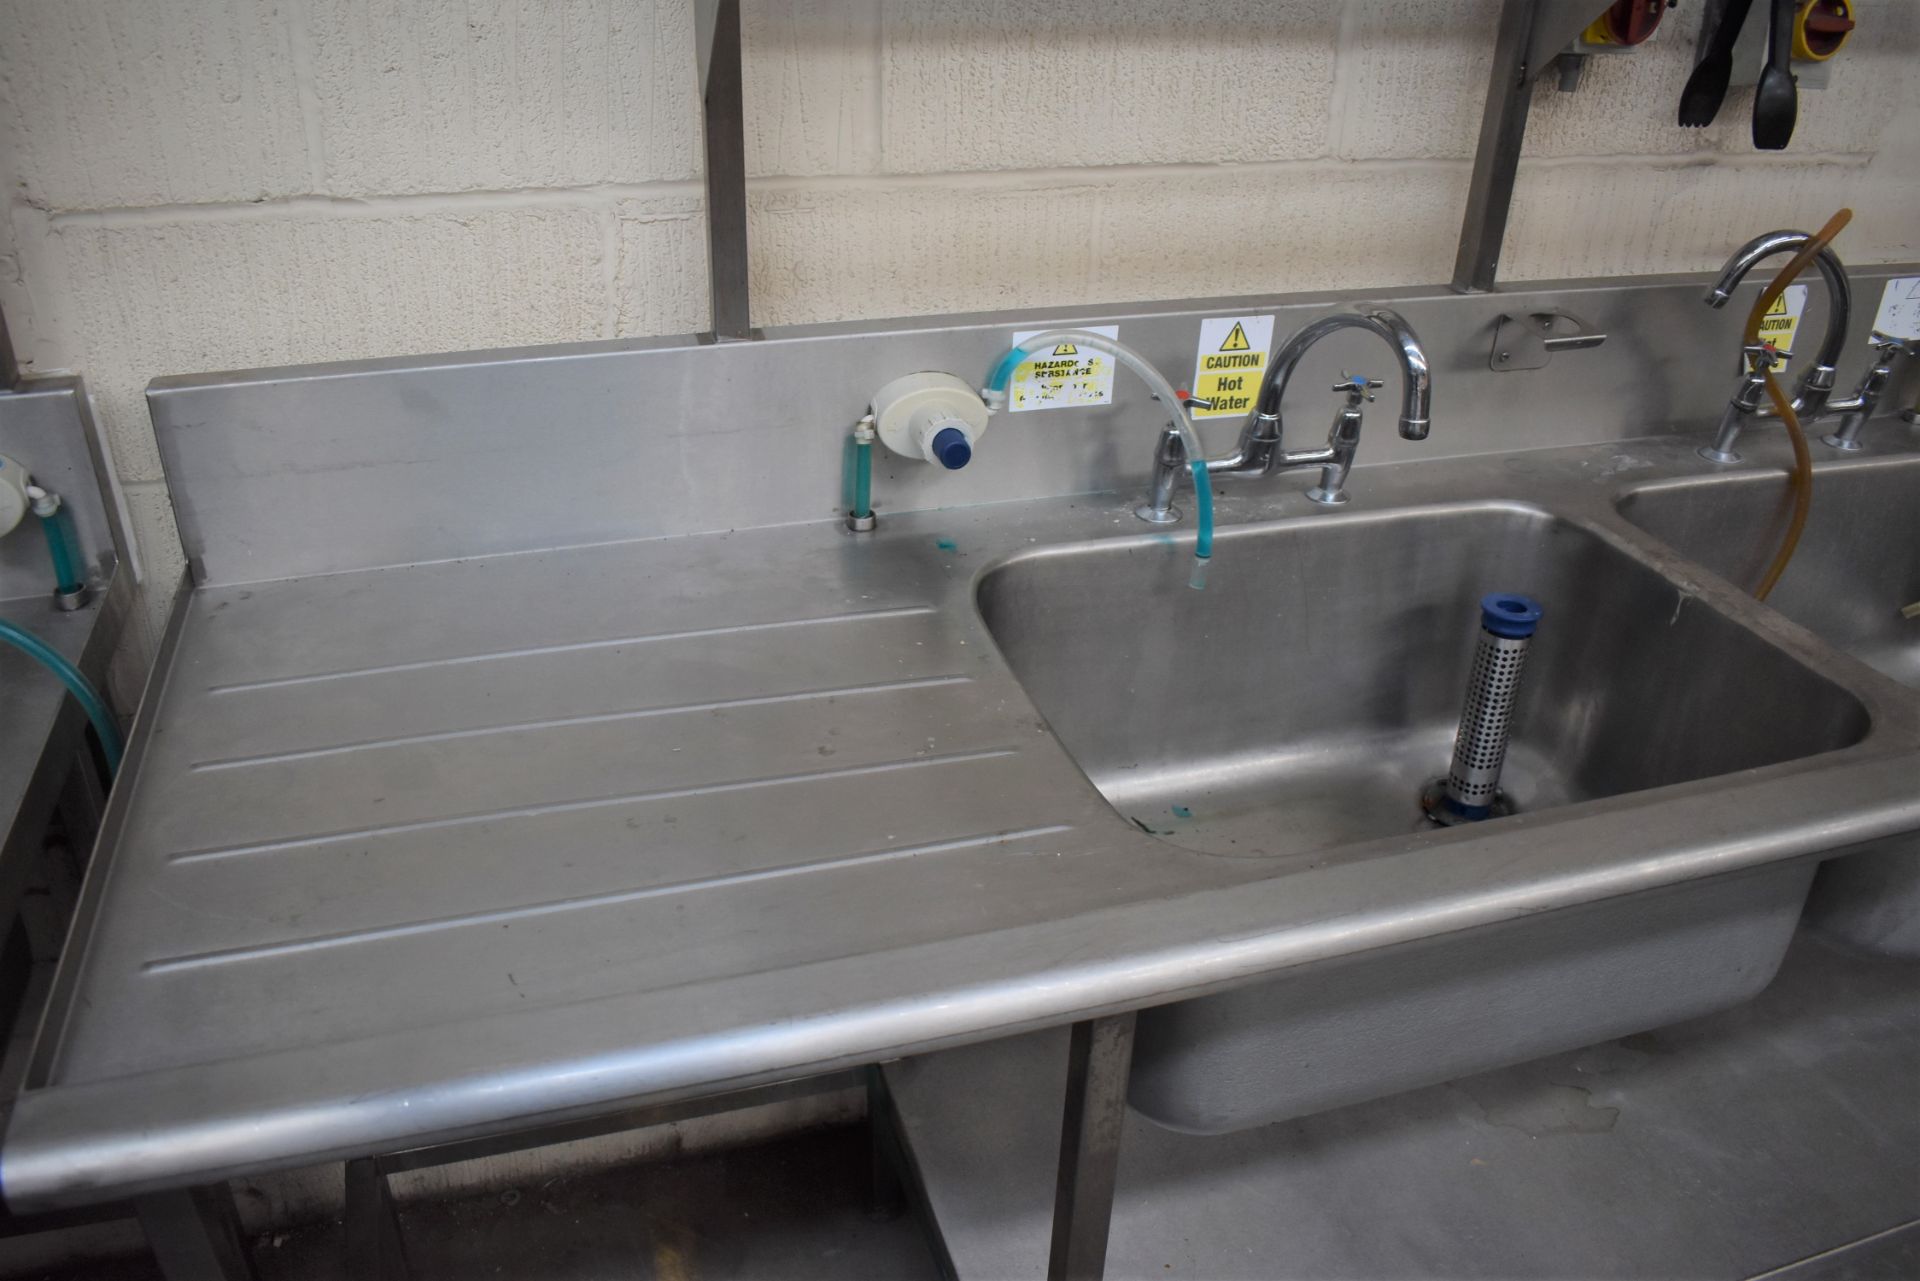 1 x Stainless Steel Commercial Wash Basin Unit With Twin Sink Bowl, Mixer Taps, Undershelf, - Image 2 of 8